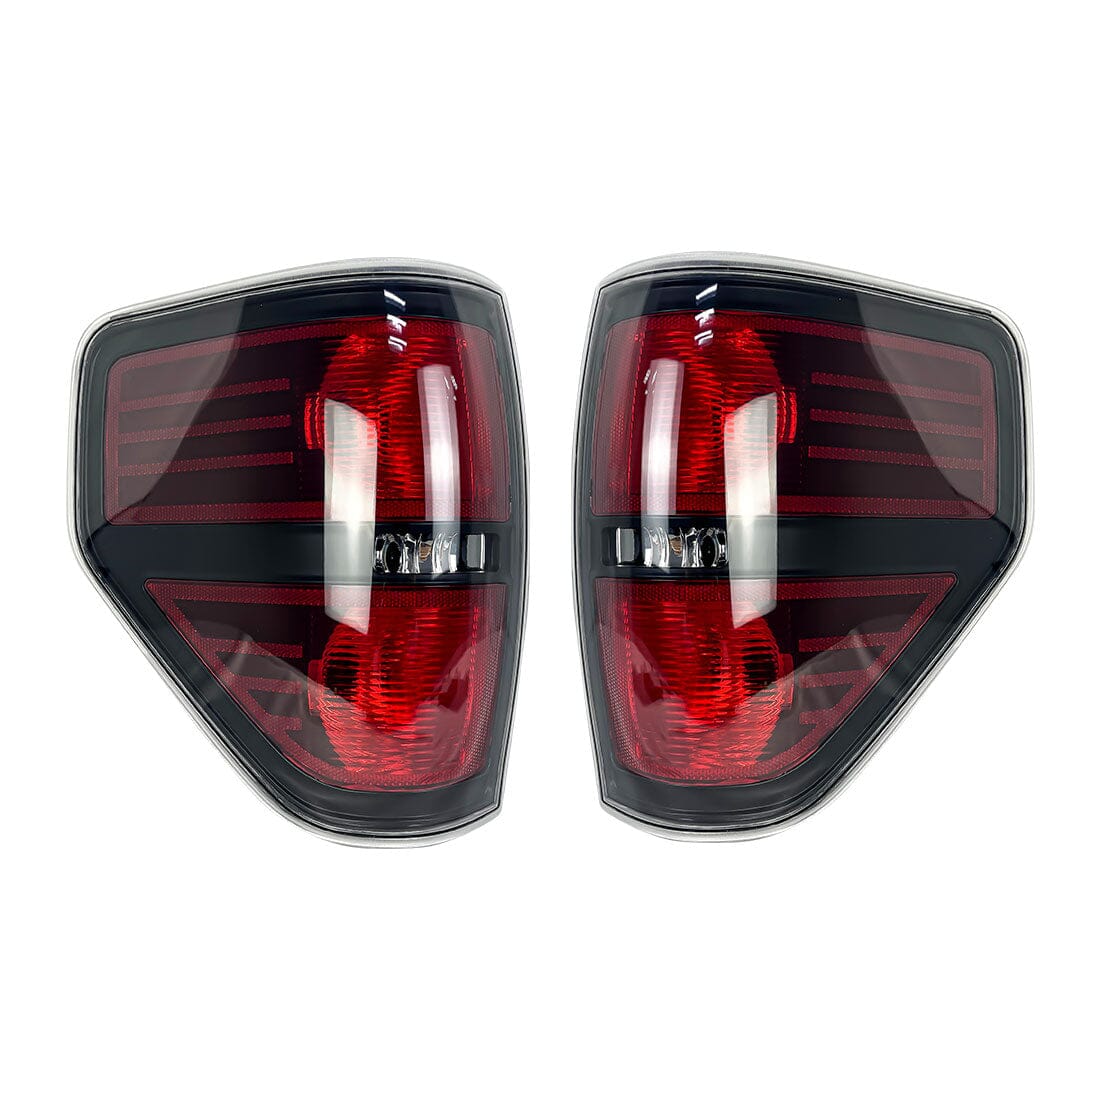 LED Tail Lights Brake Lamps Assembly-Black Housing without light bulbs